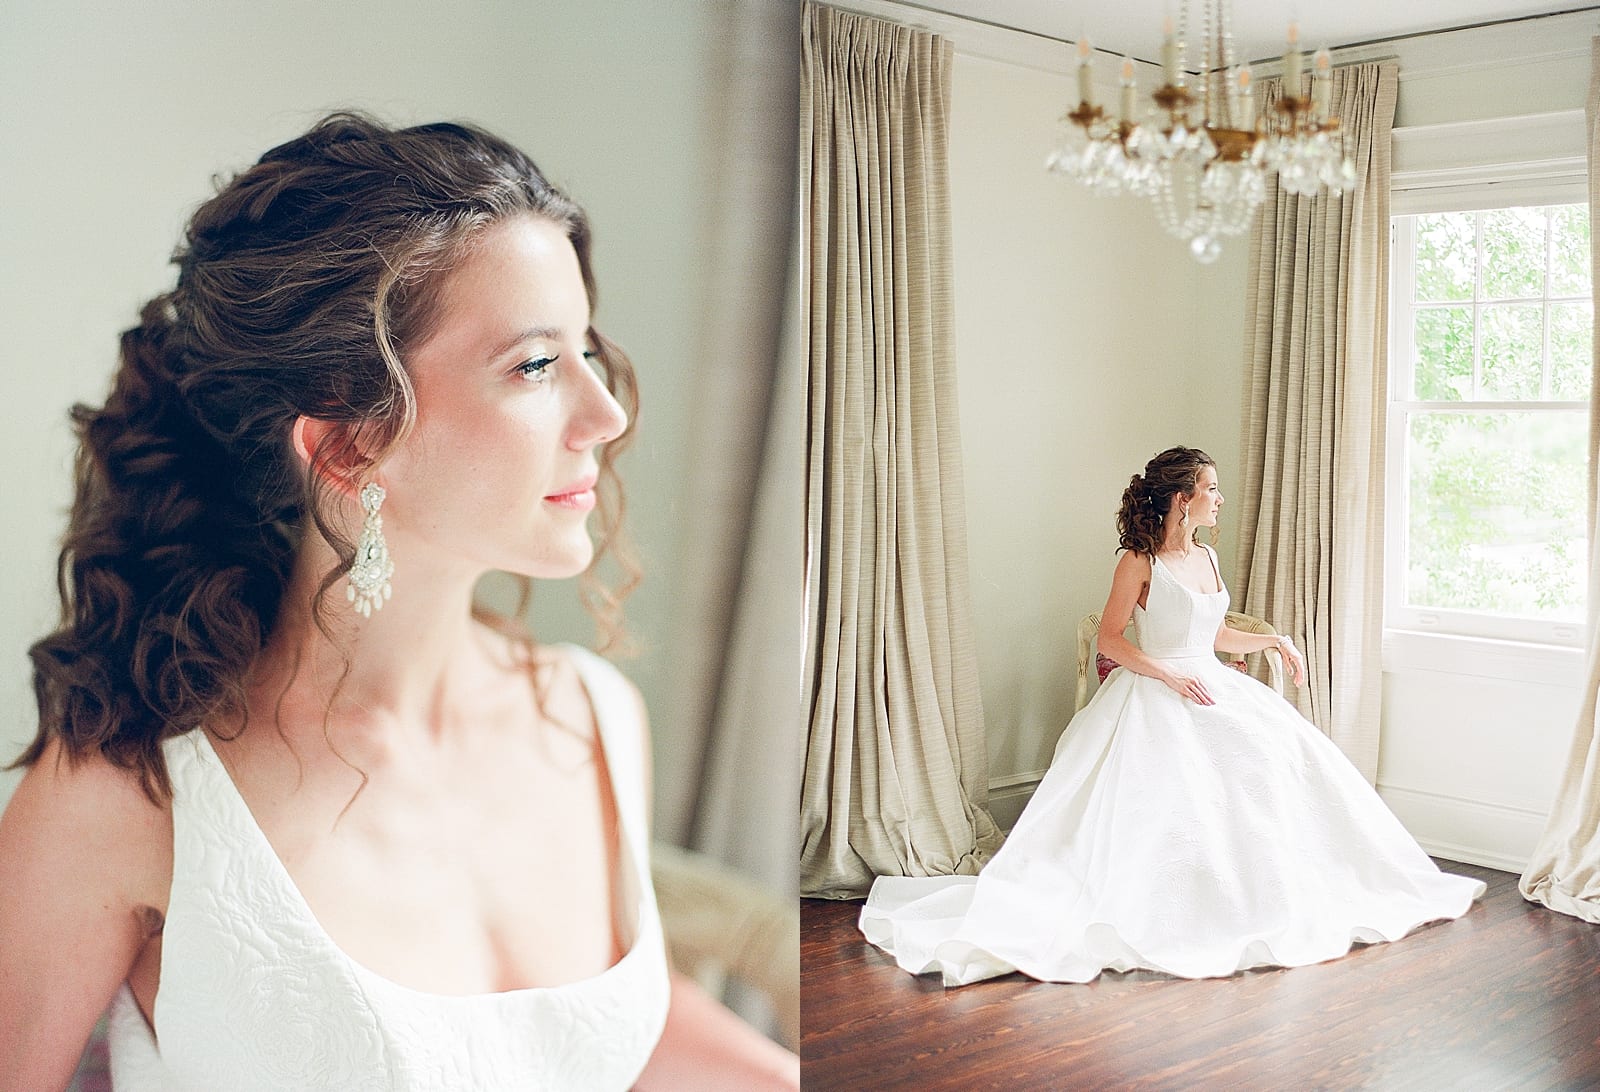 Bridal Portraits Bride Sitting Looking Out Window Photo